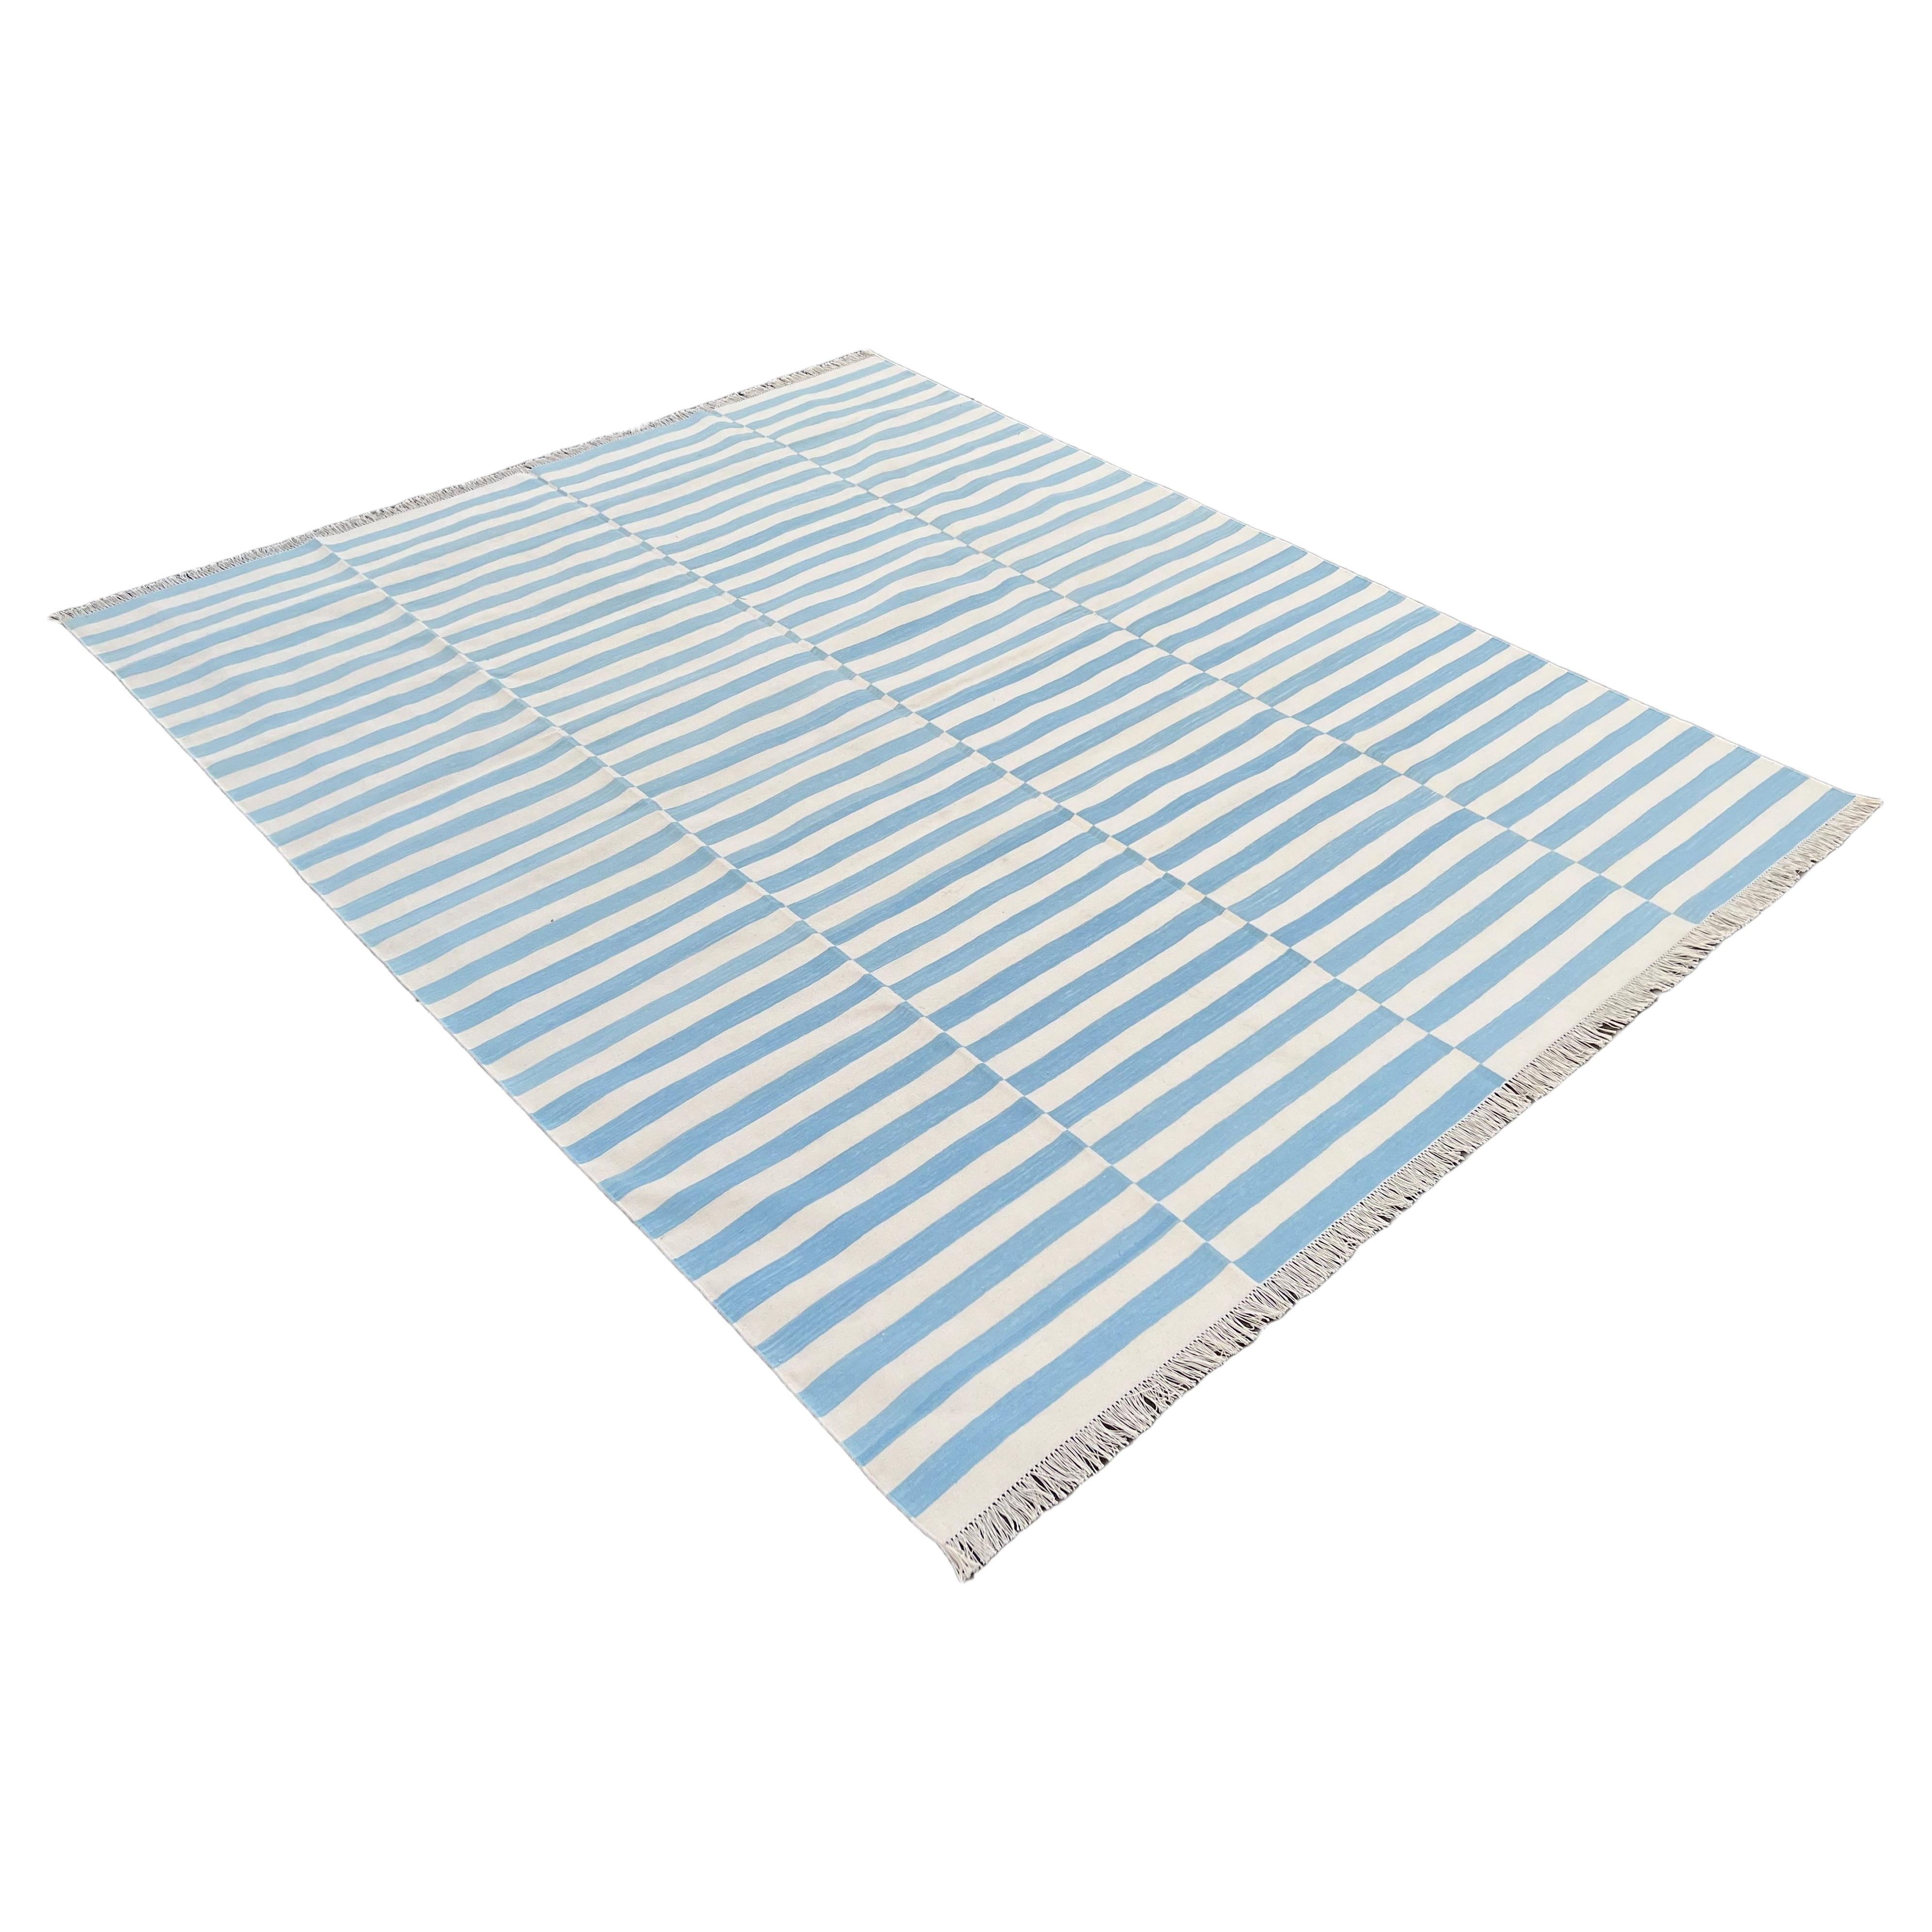 Handmade Cotton Area Flat Weave Rug, Sky Blue & White Striped Indian Dhurrie Rug